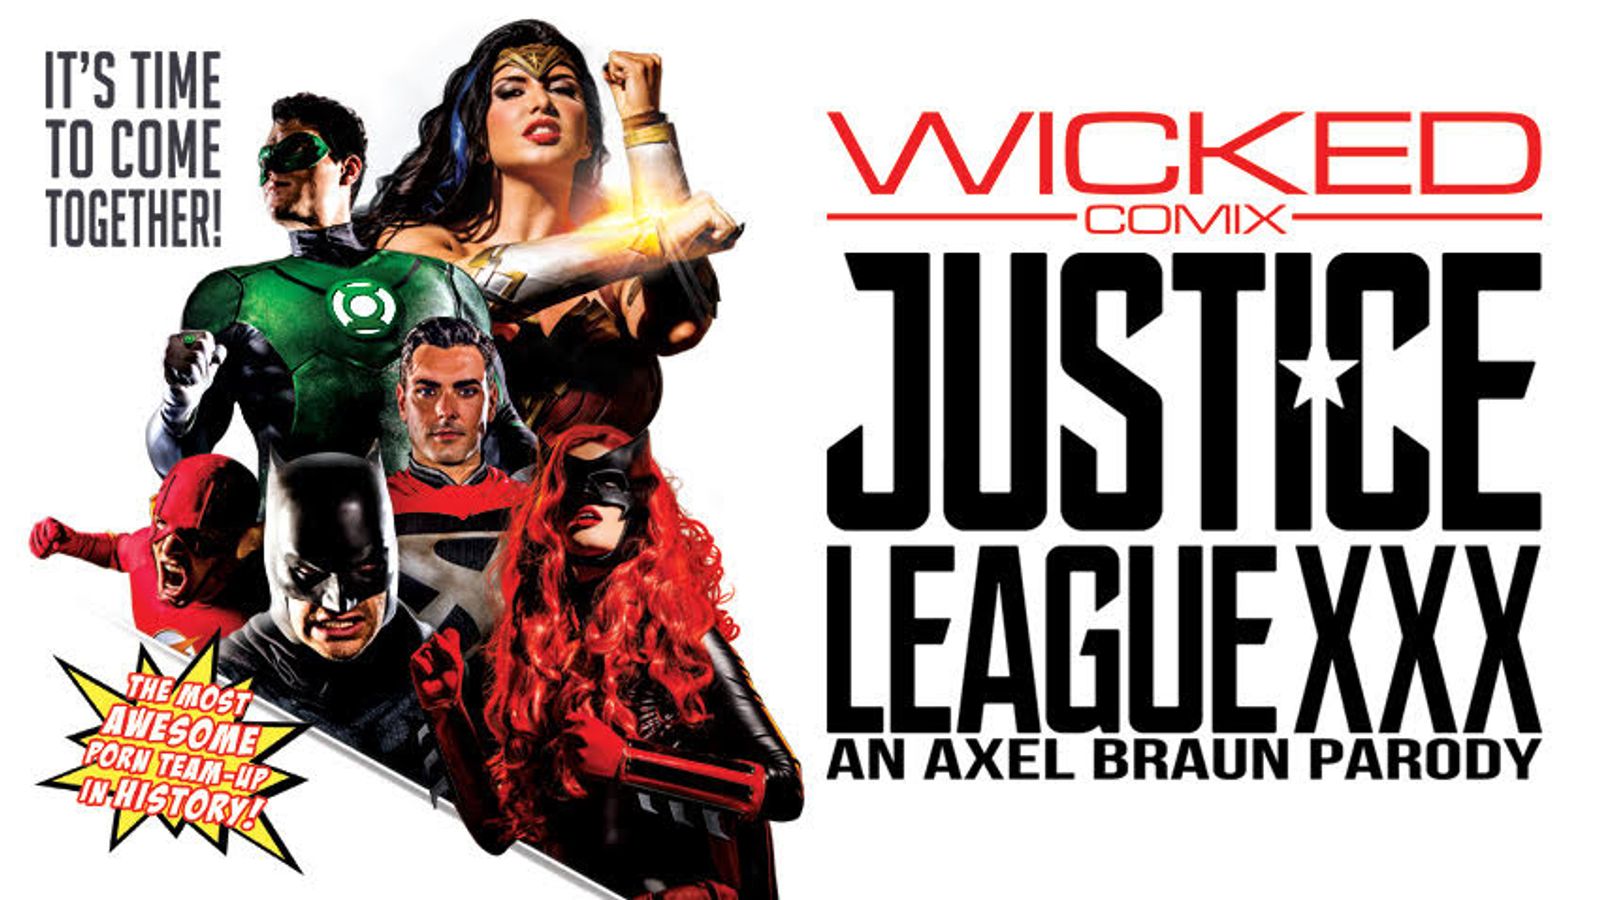 Braun's 'Justice League' Gets AVN Glory as Mainstream Film Panned